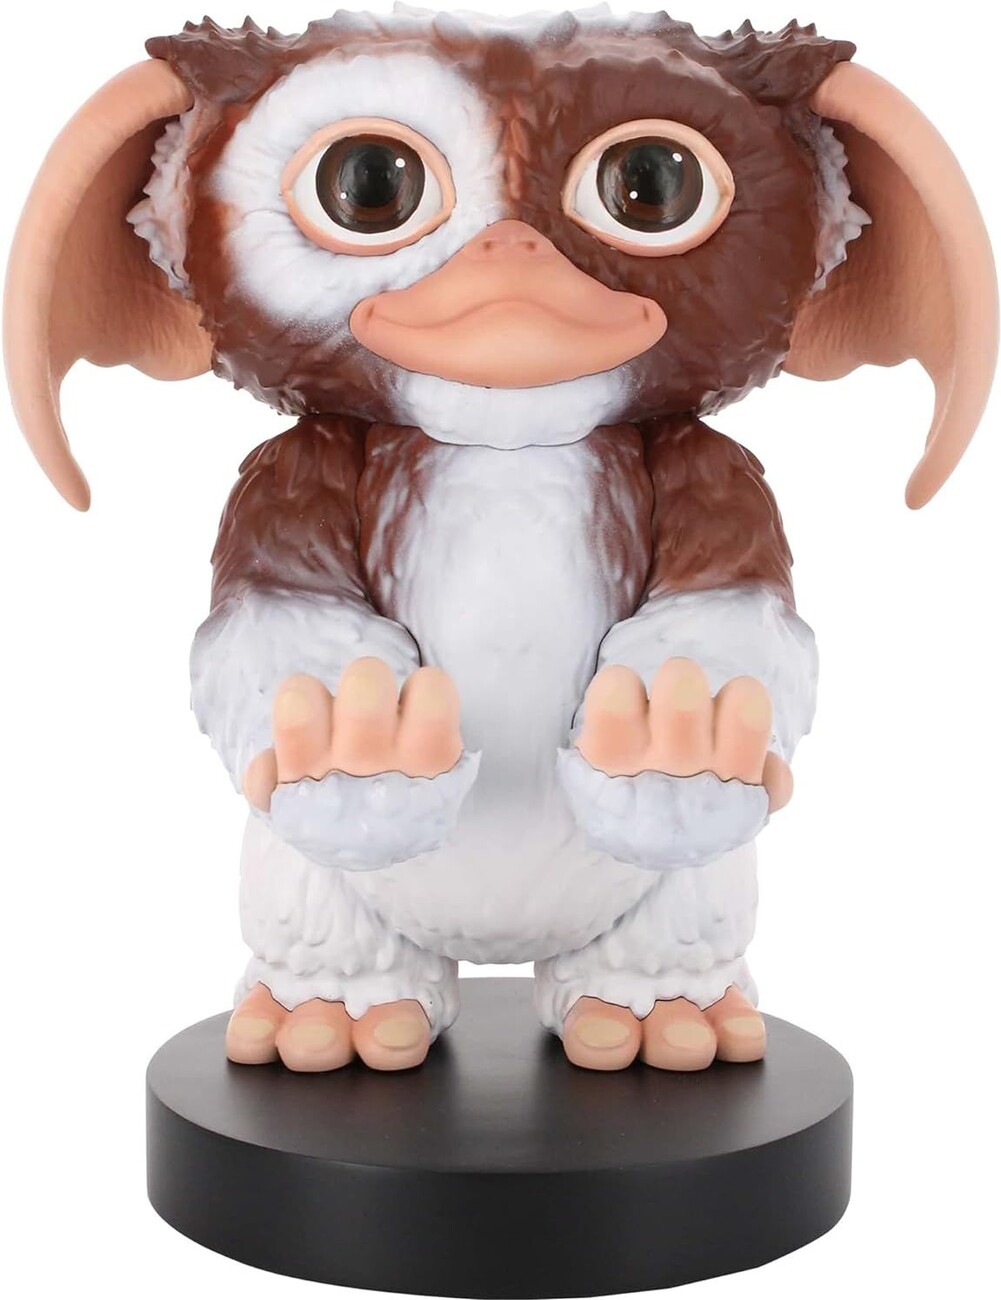 Warner Bros Gremlins 6 Plush Mogwai Toy for Dogs | Gremlins Mogwai Plush  Dog Toy | Small | Classic Movie Toys for All Dogs, Official Dog Toy Product